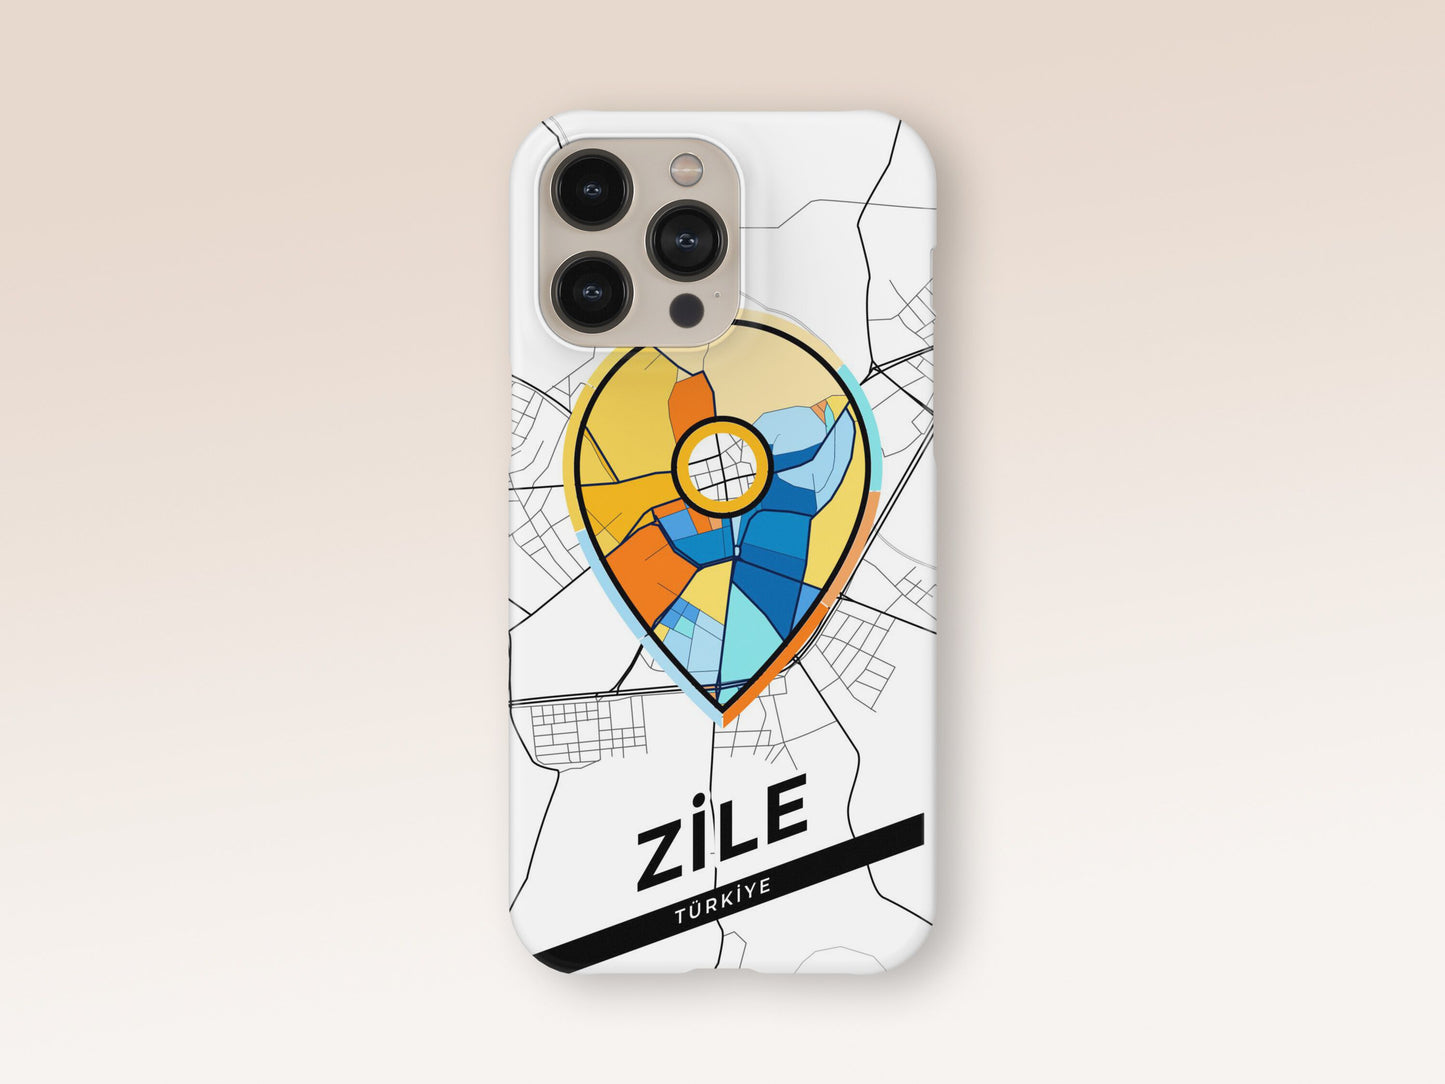 Zile Turkey slim phone case with colorful icon 1